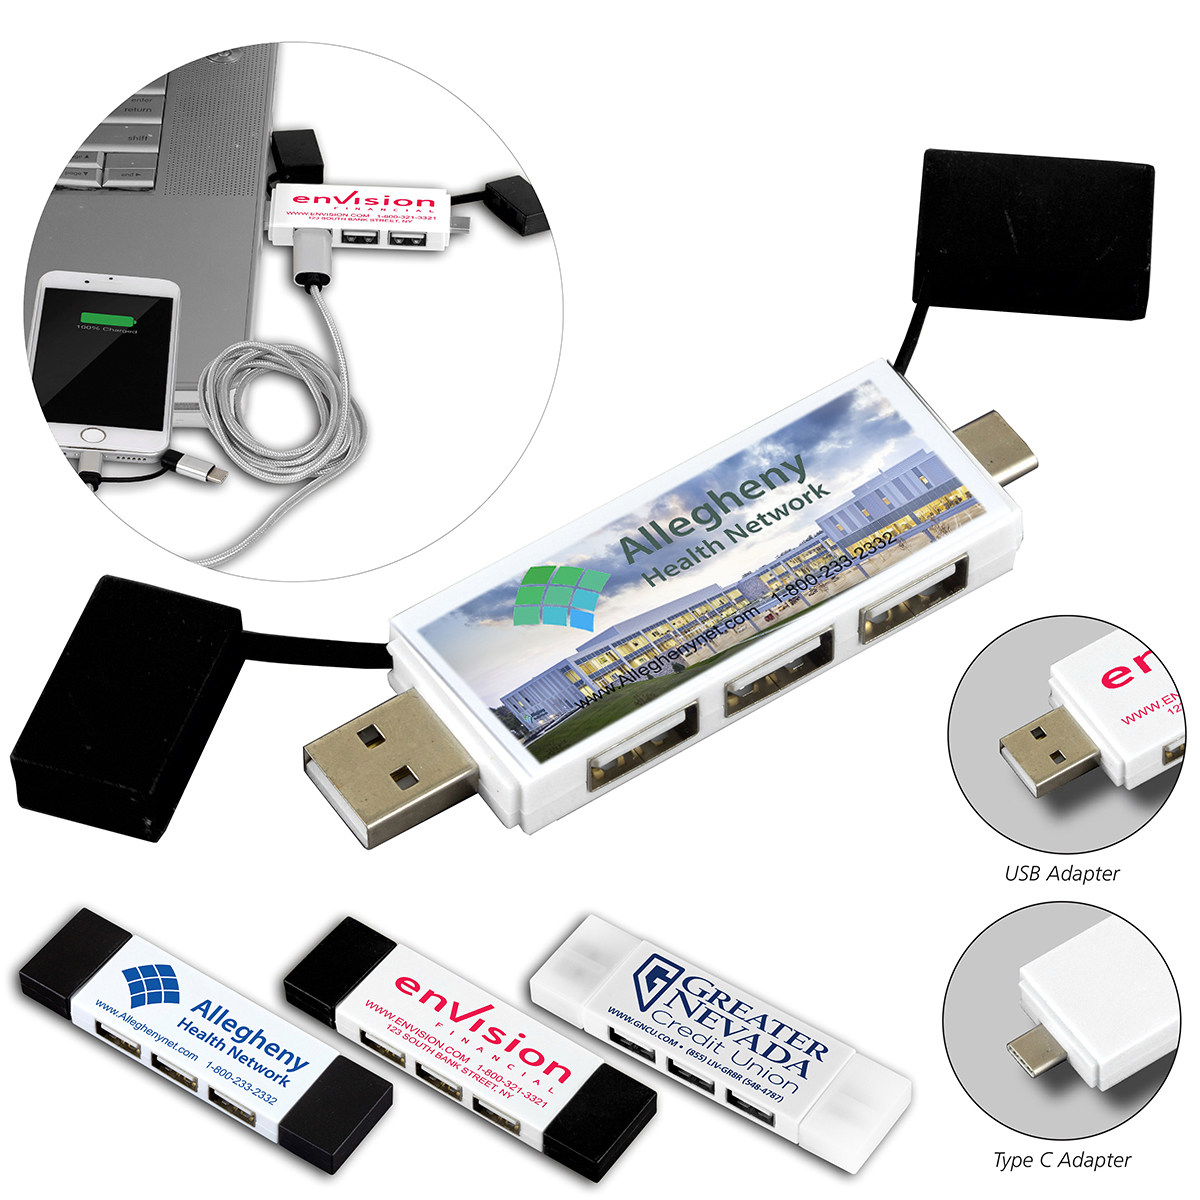 "FREEDOM" 2-in-1 3 Port Mini USB Hub with Type A & Type C Adapter